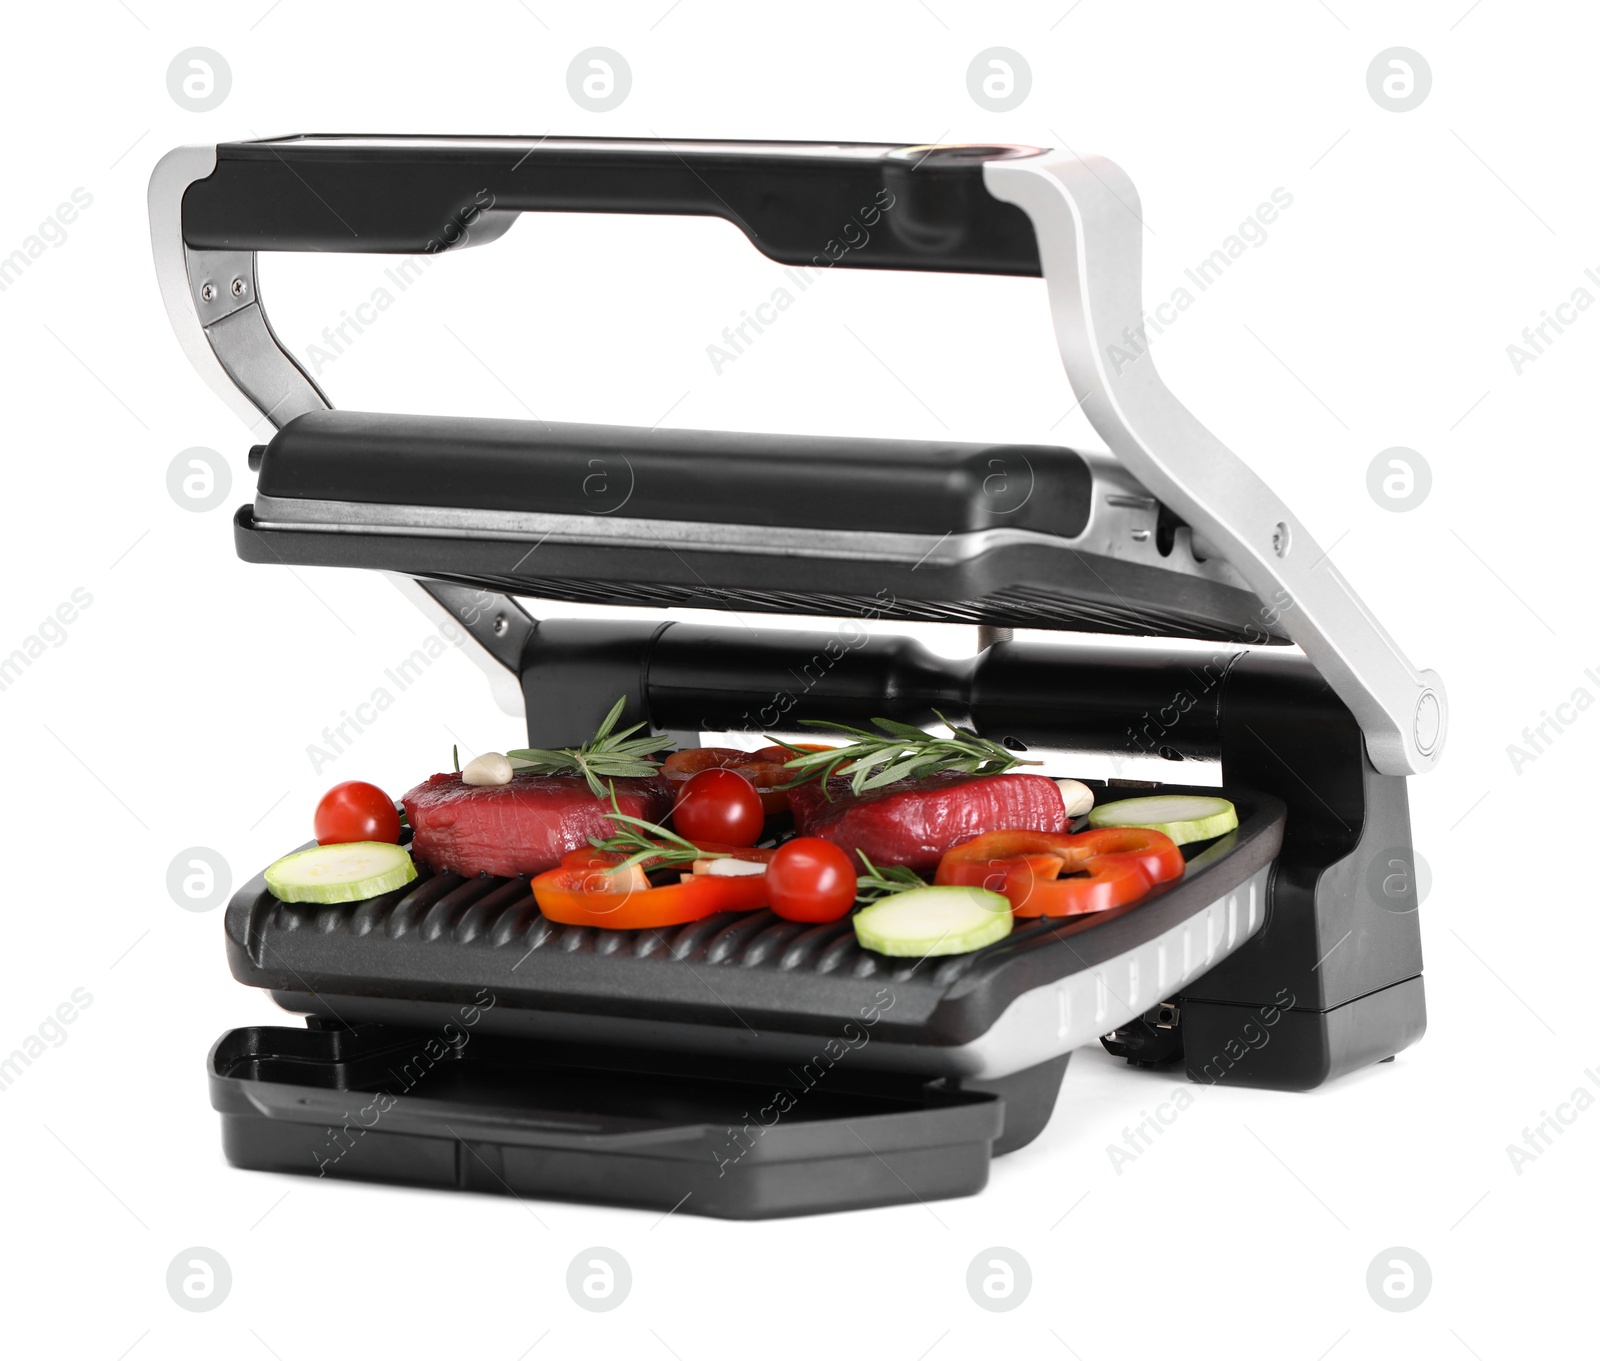 Photo of Electric grill with raw meat, rosemary and vegetables isolated on white